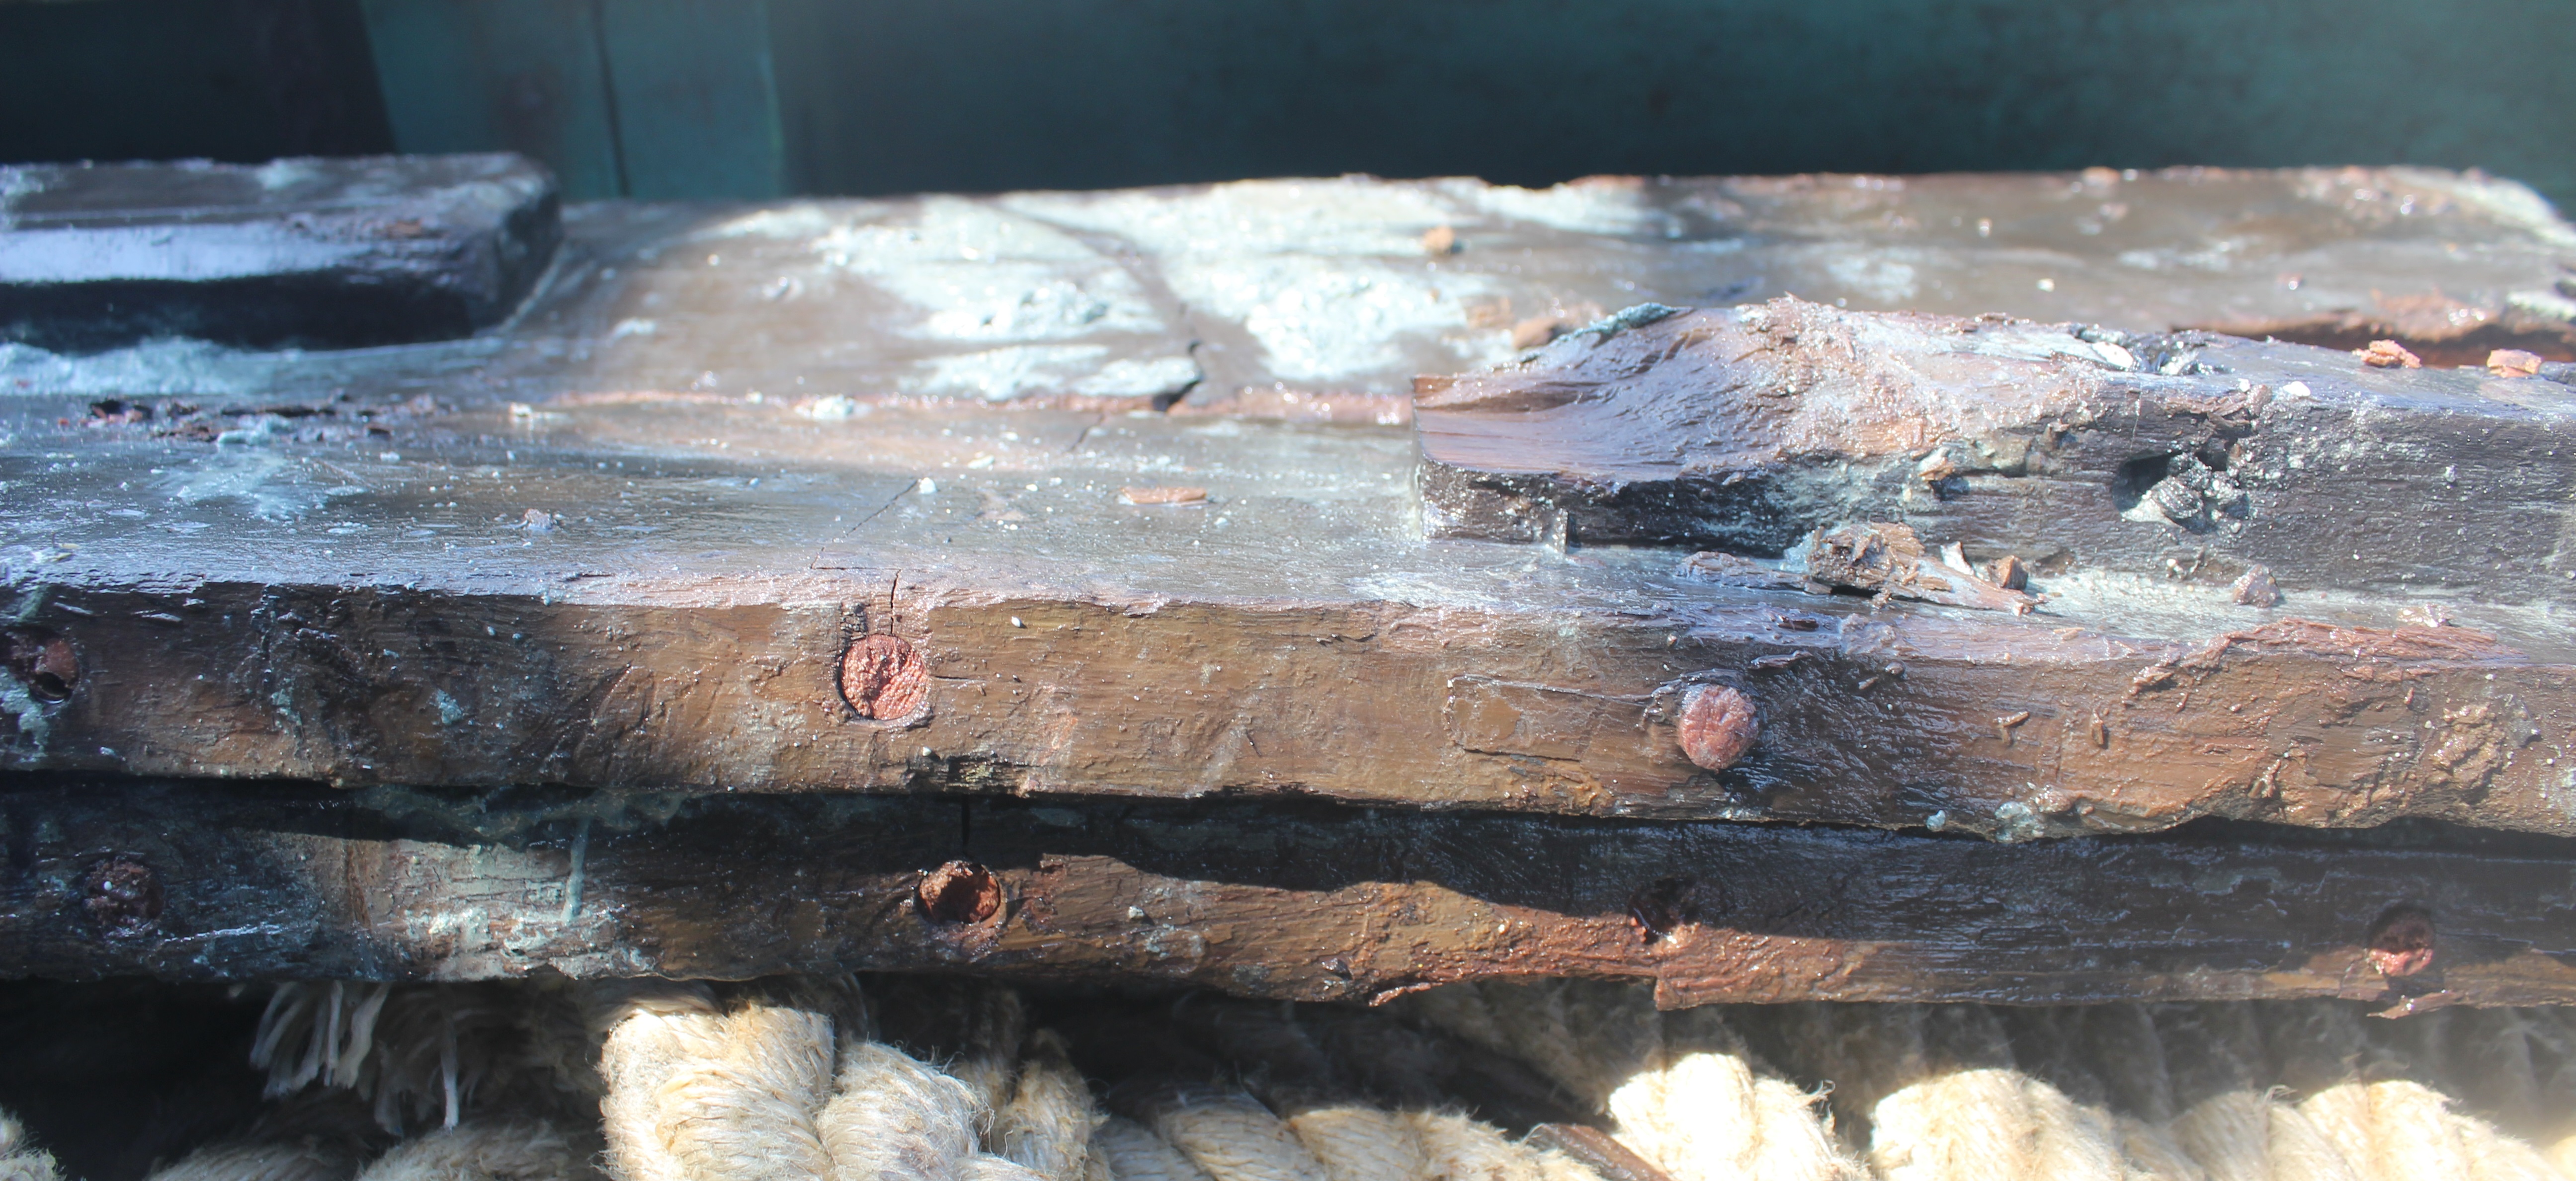 Dowels were used to edge-join the hull planks.